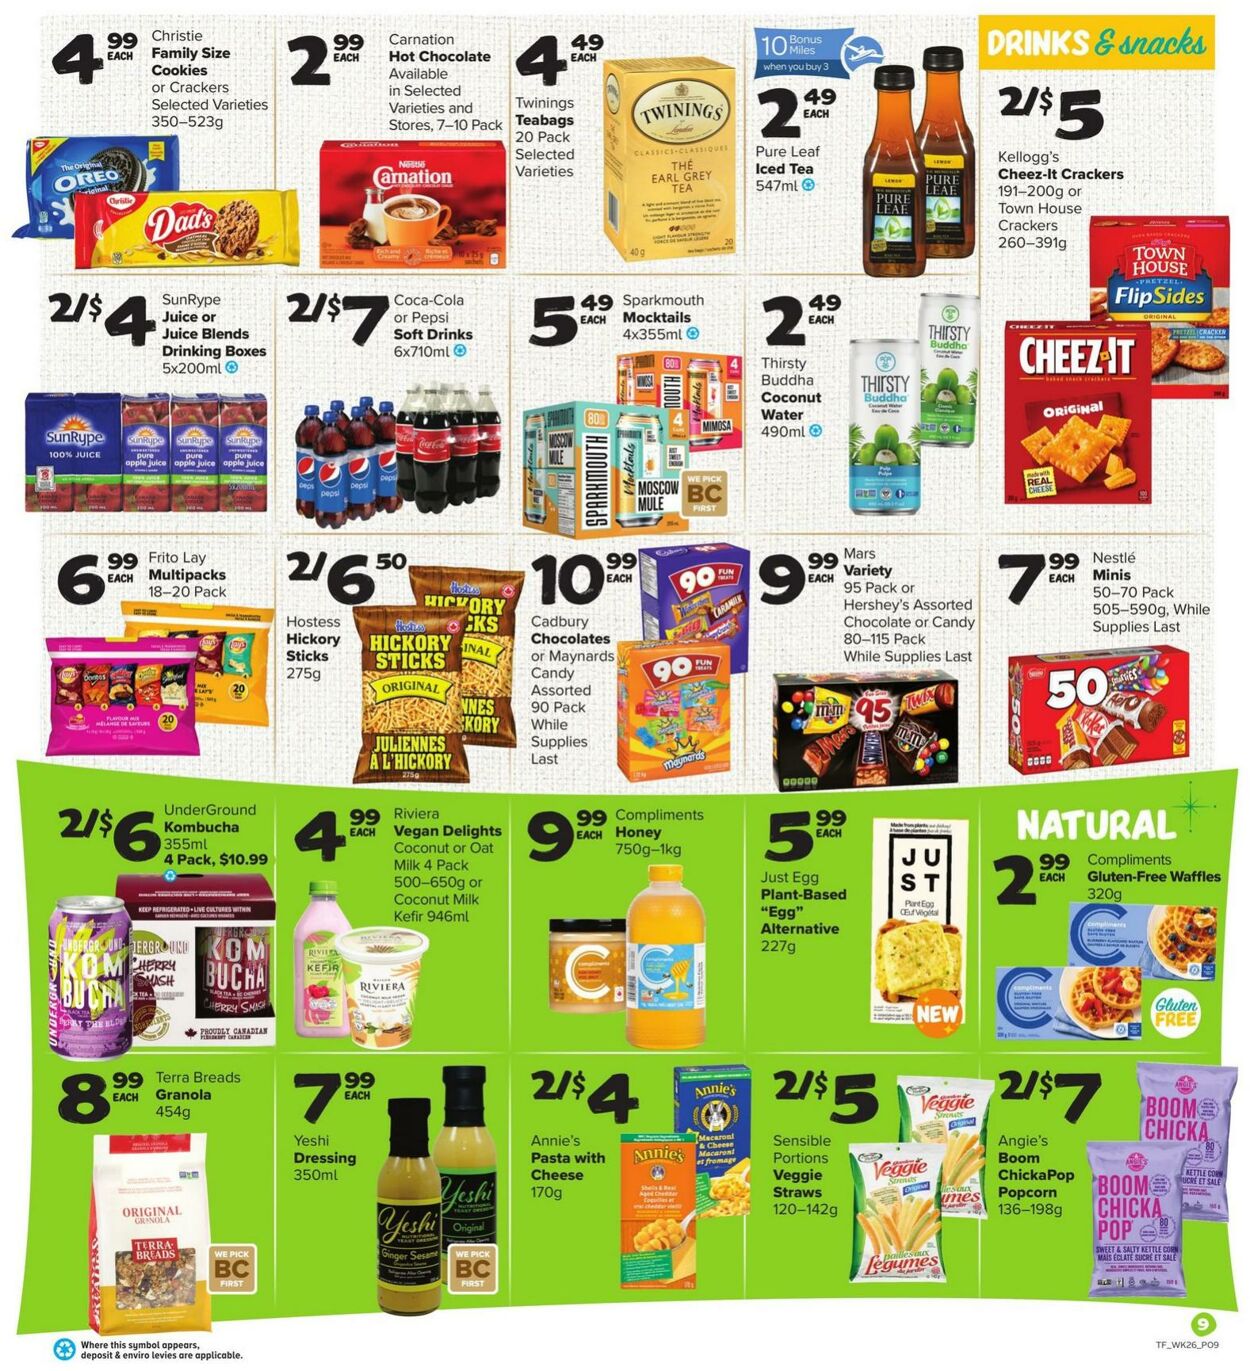 Flyer Thrifty Foods 21.10.2021 - 27.10.2021